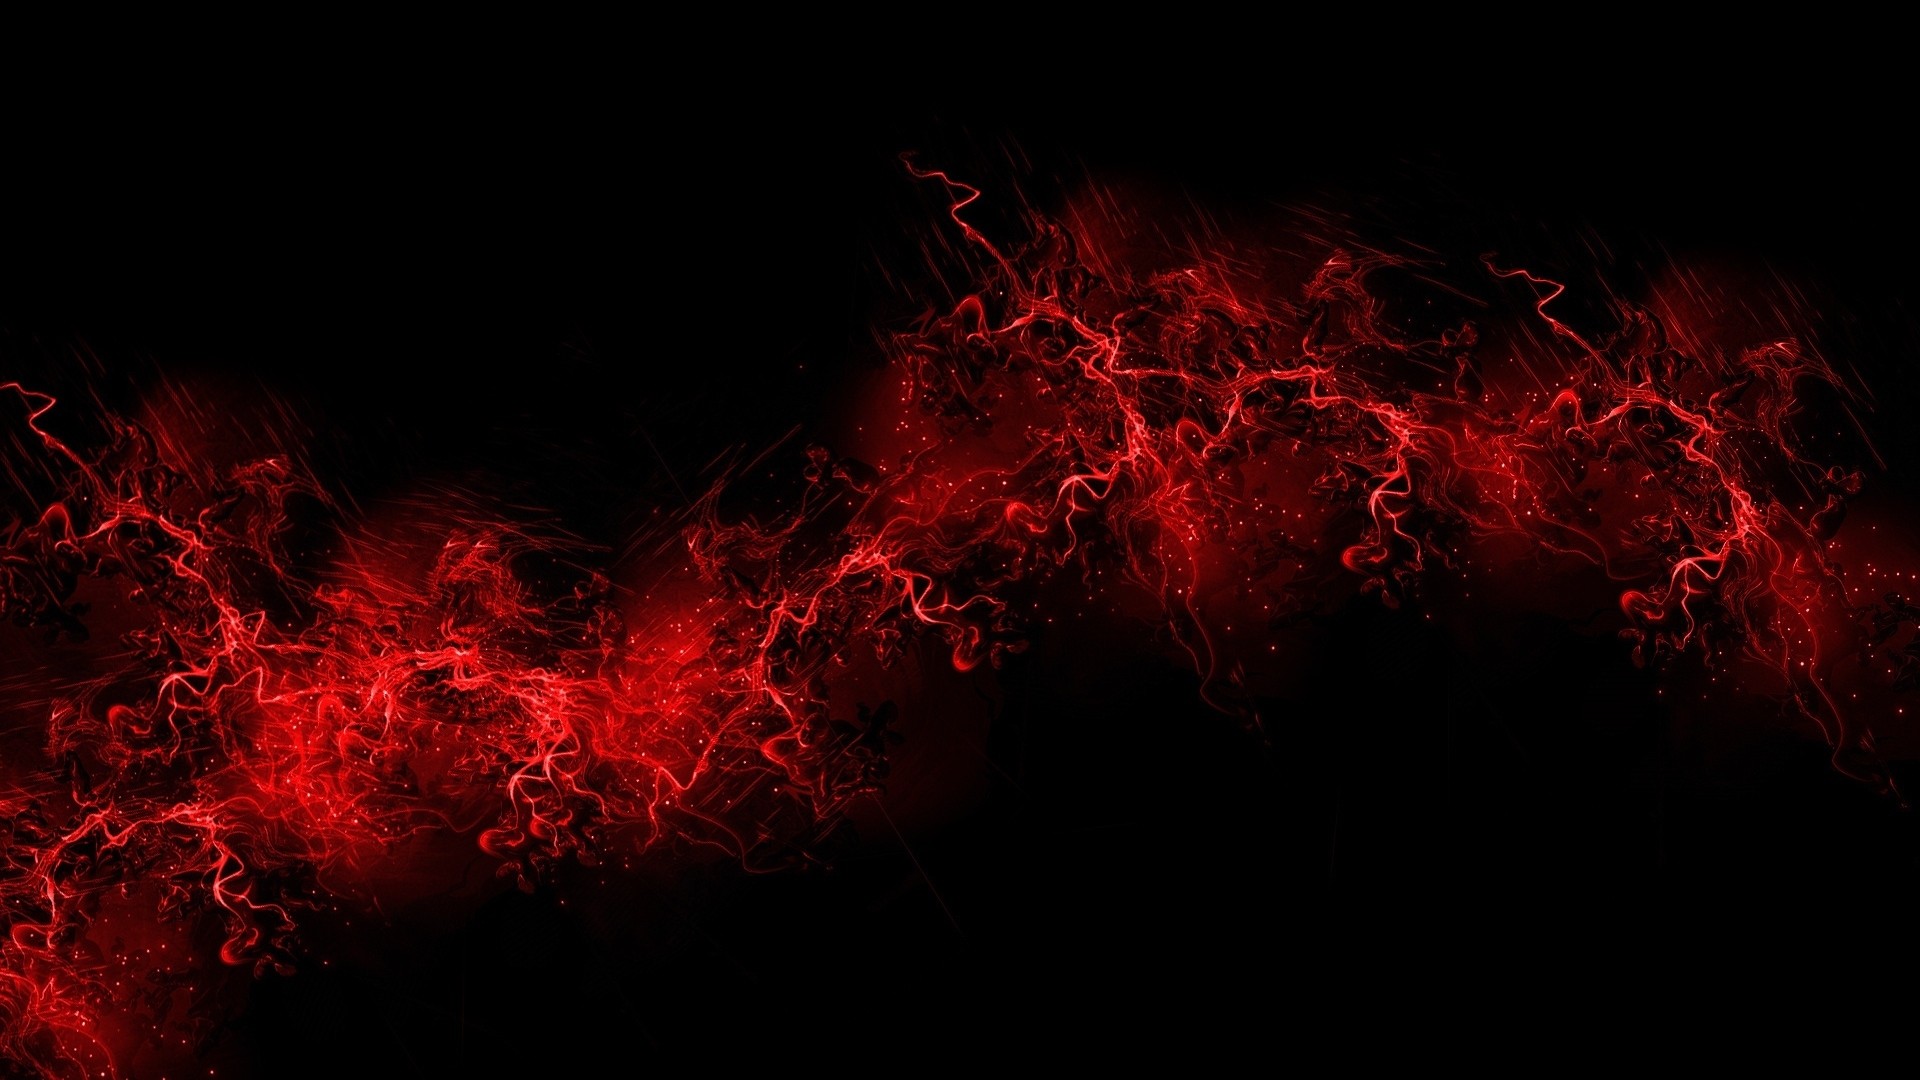 1920x1080 HD-background-images-red-and-black-Full-Hd-: Full Hd 1080p Abstract ...